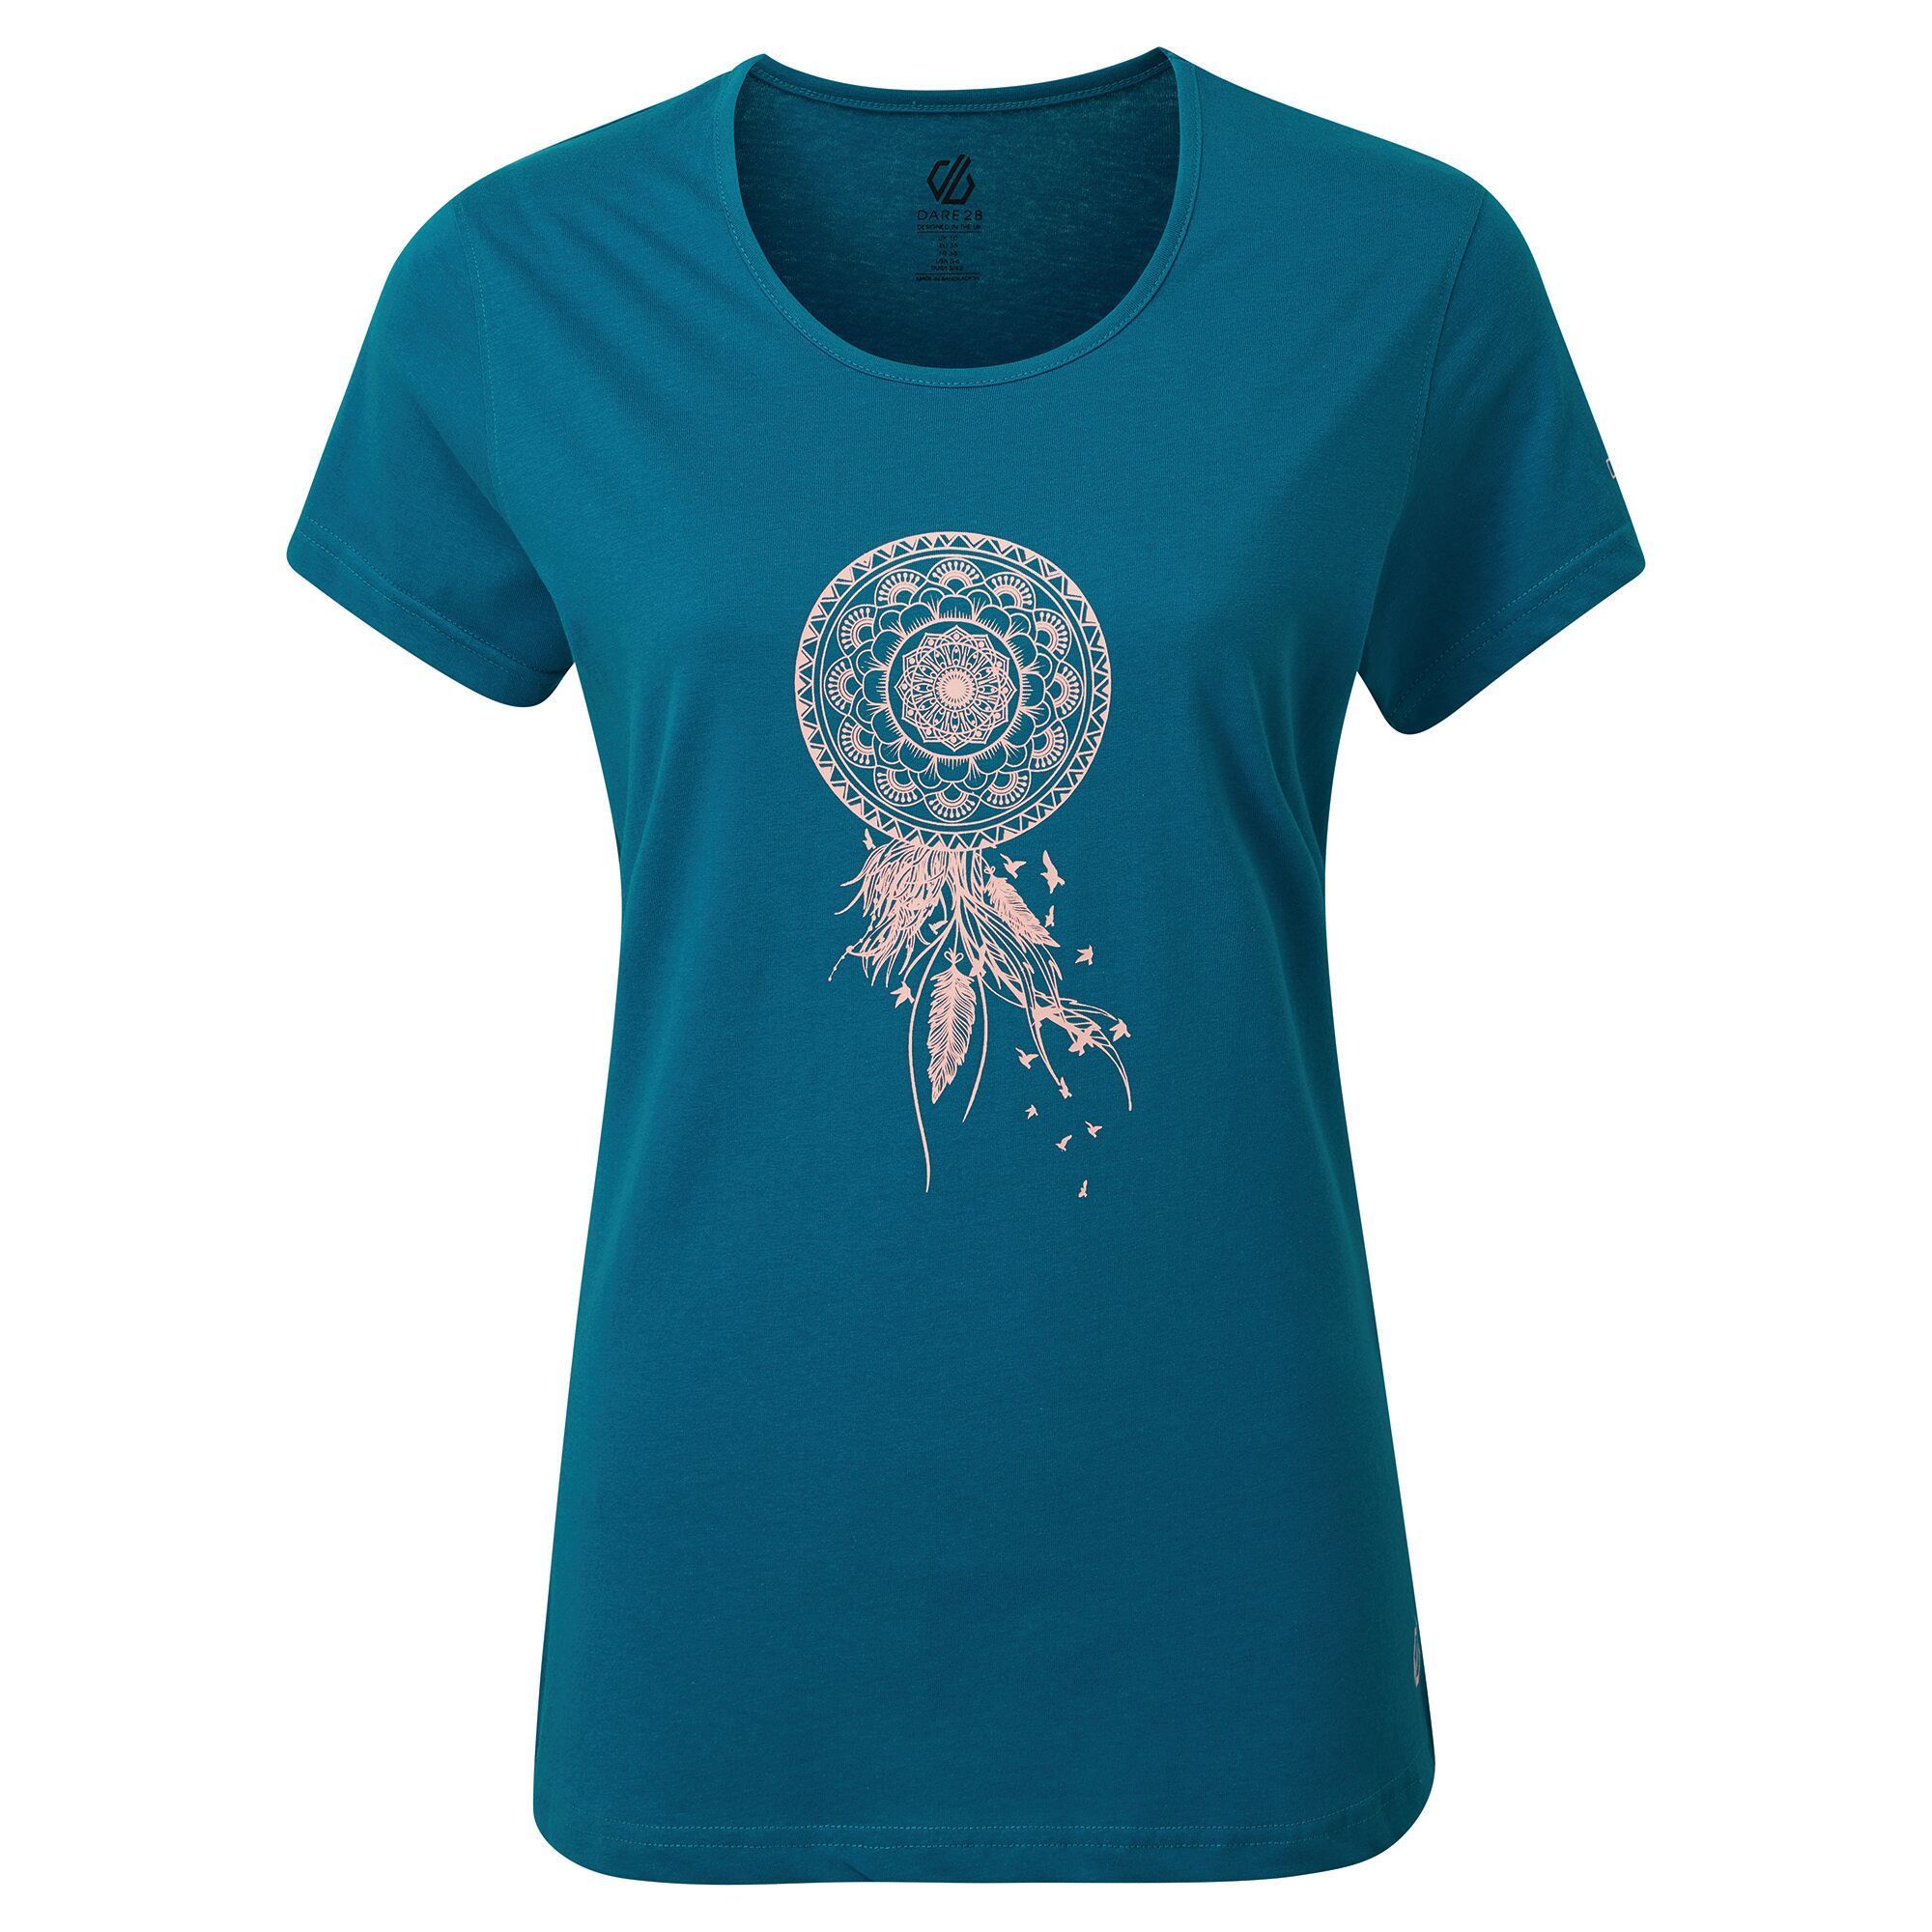 Material: 100% Cotton. Breathable and durable short sleeved t-shirt with scoop neckline. Features a dream-catcher themed design.